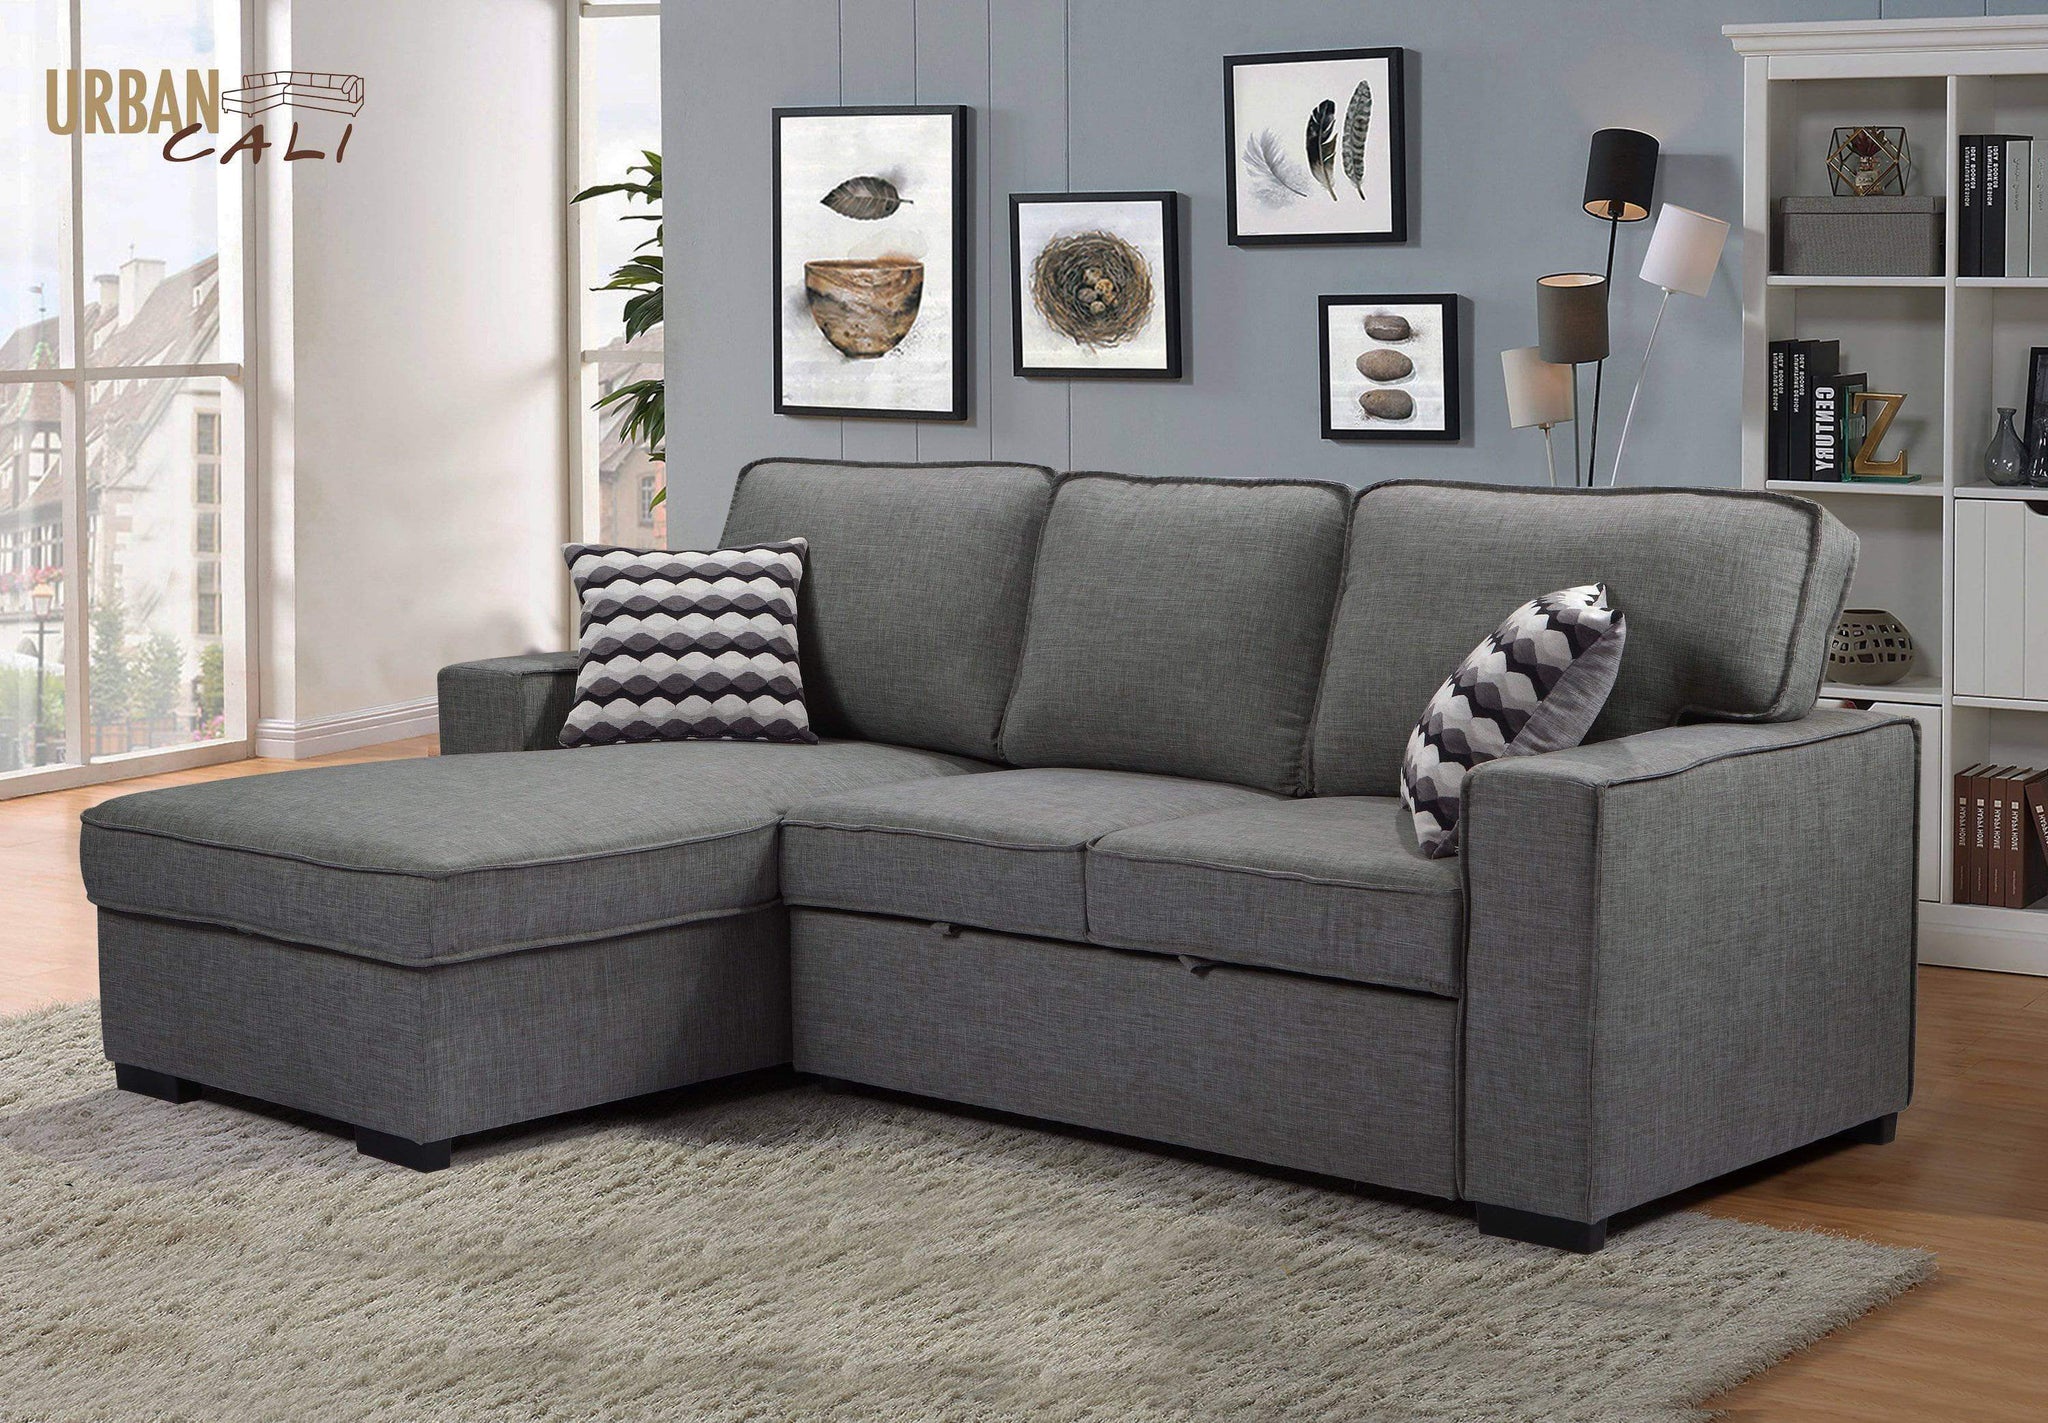 canada ldogeinfo sectional sofa bed with storage